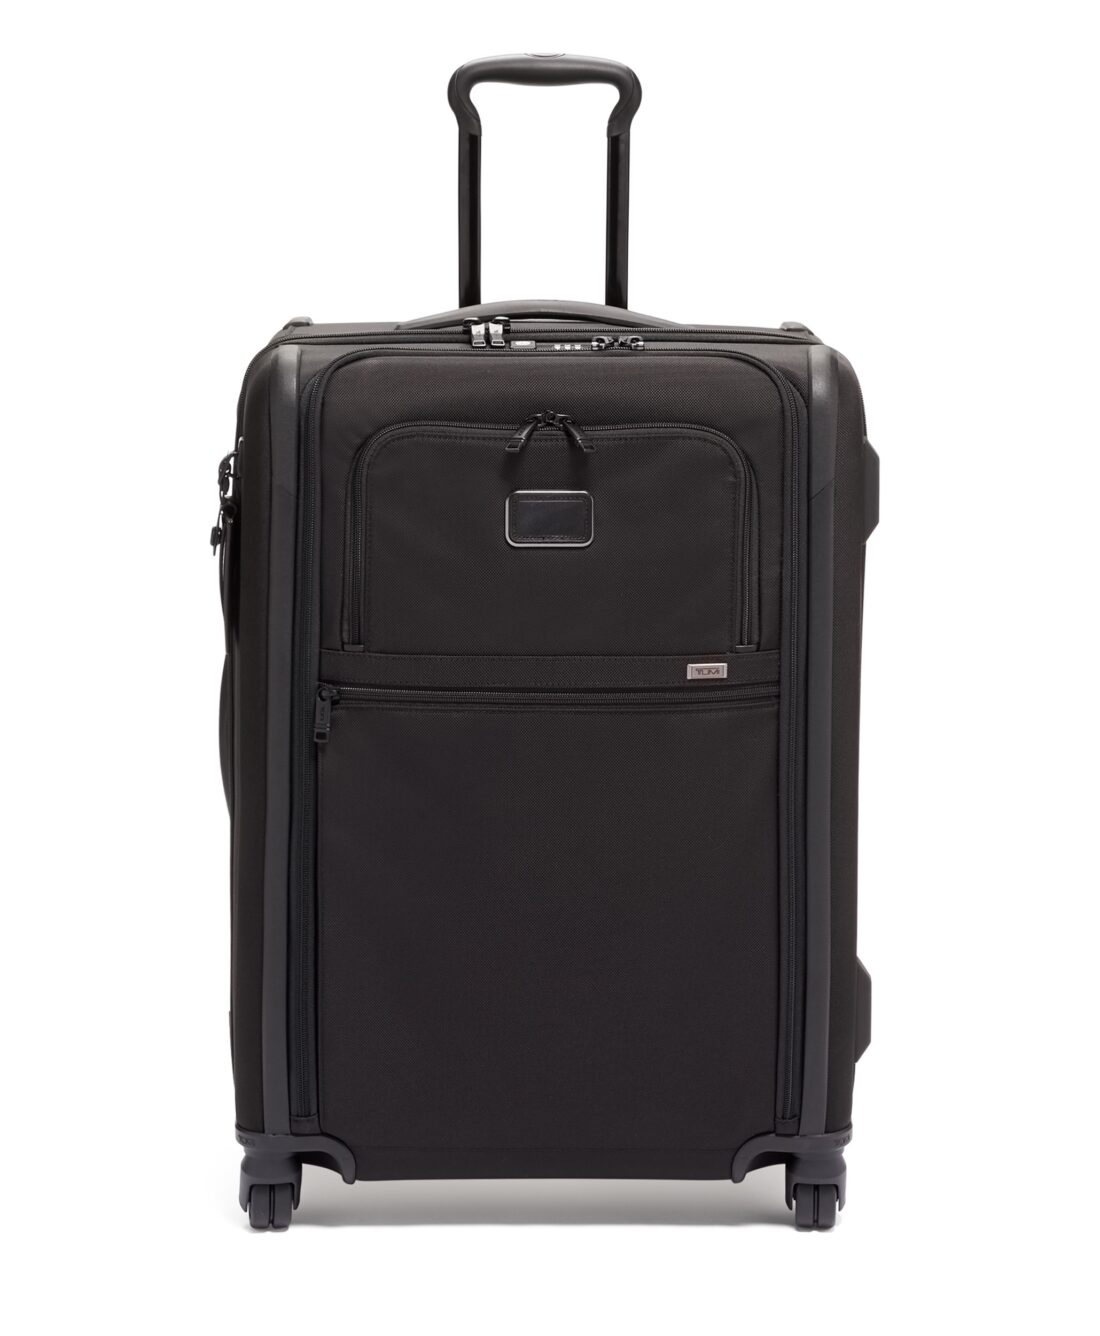 Alpha Hybrid Short Trip Expandable 4 Wheeled Packing Case in Black.